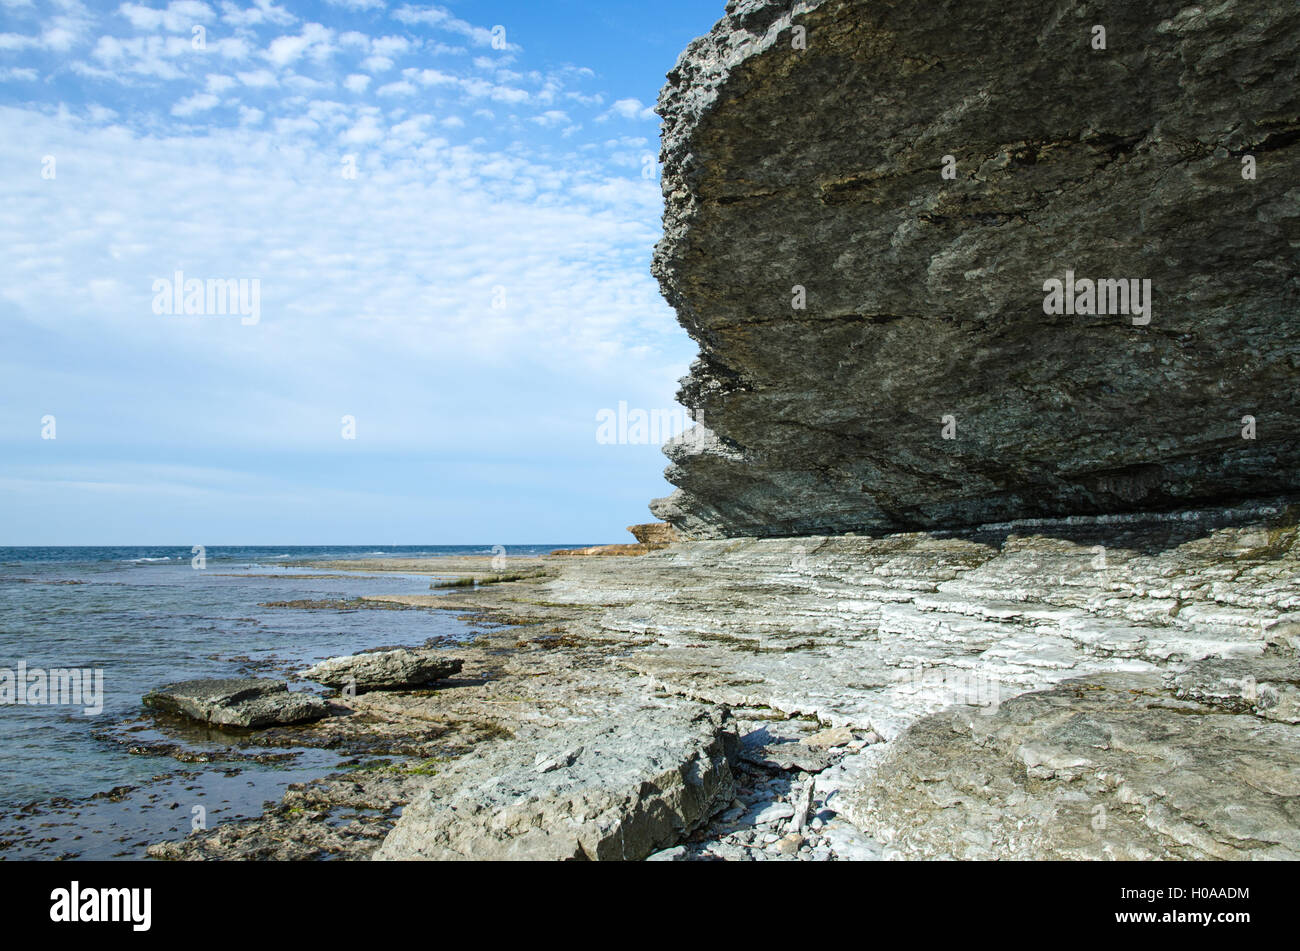 Coastline with eroded limestone cliffs overhand at the swedish island Oland in the Baltic Sea Stock Photo